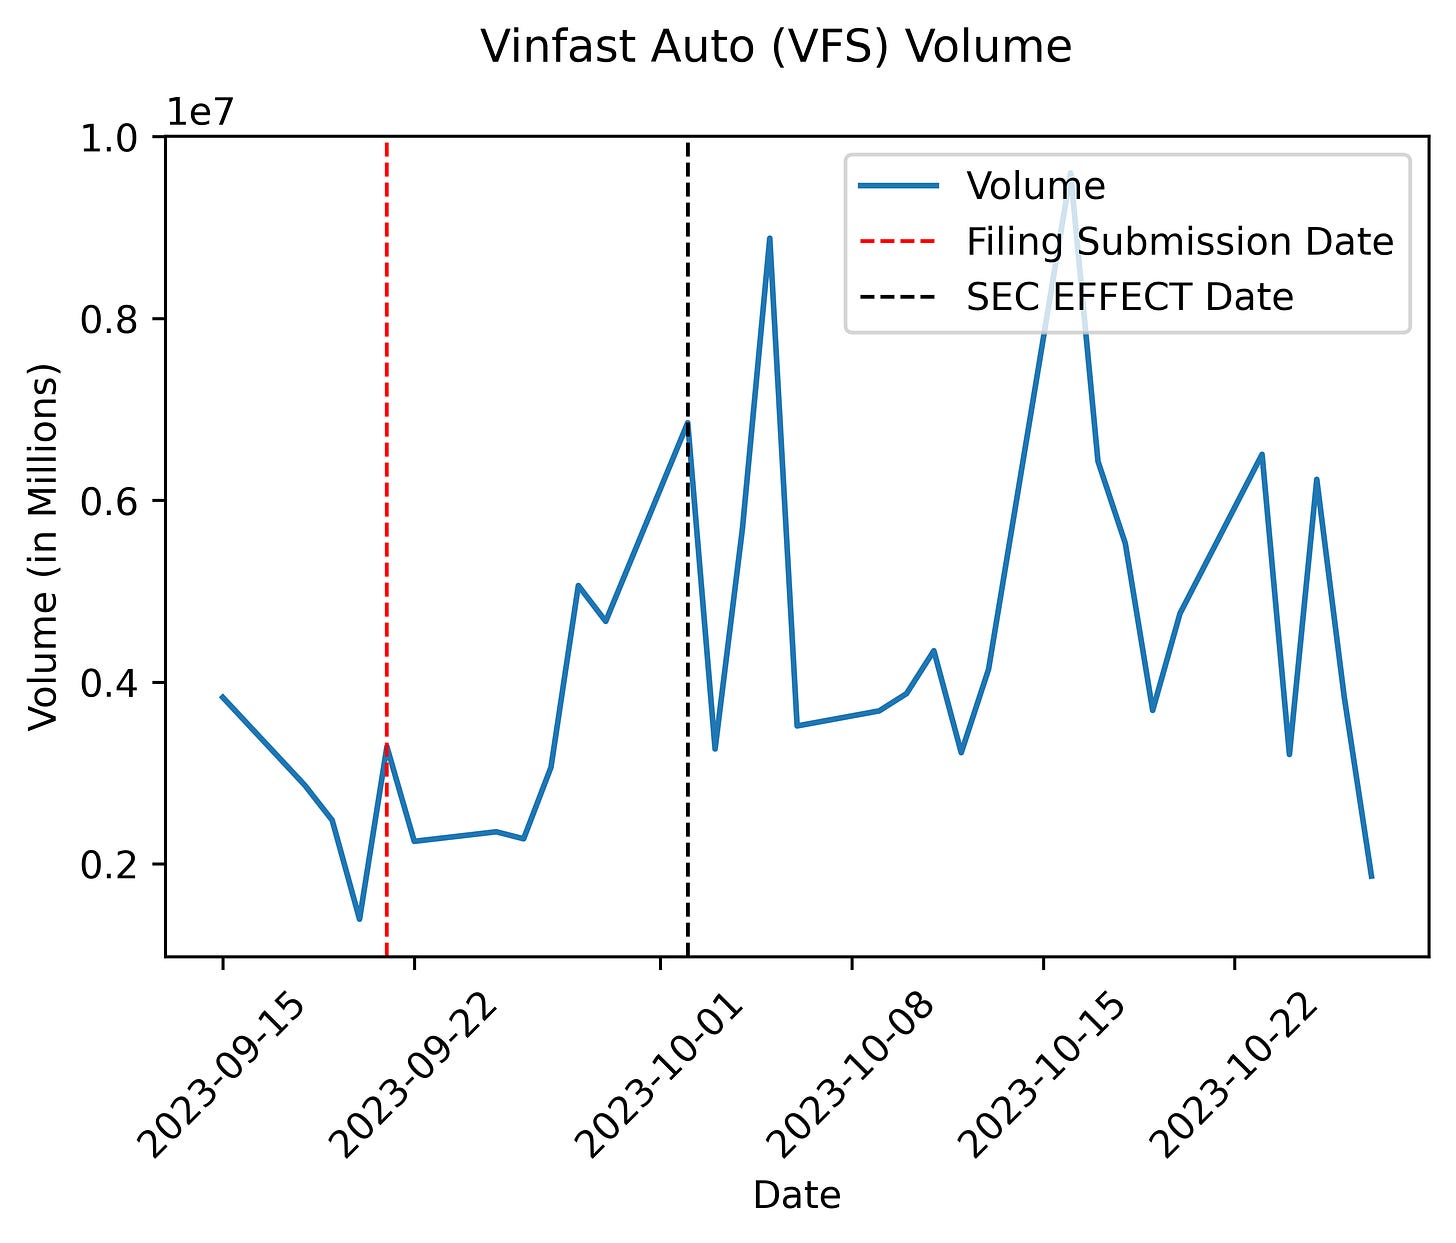 performance of vinfast stock after sec dilution announcement and effective notice